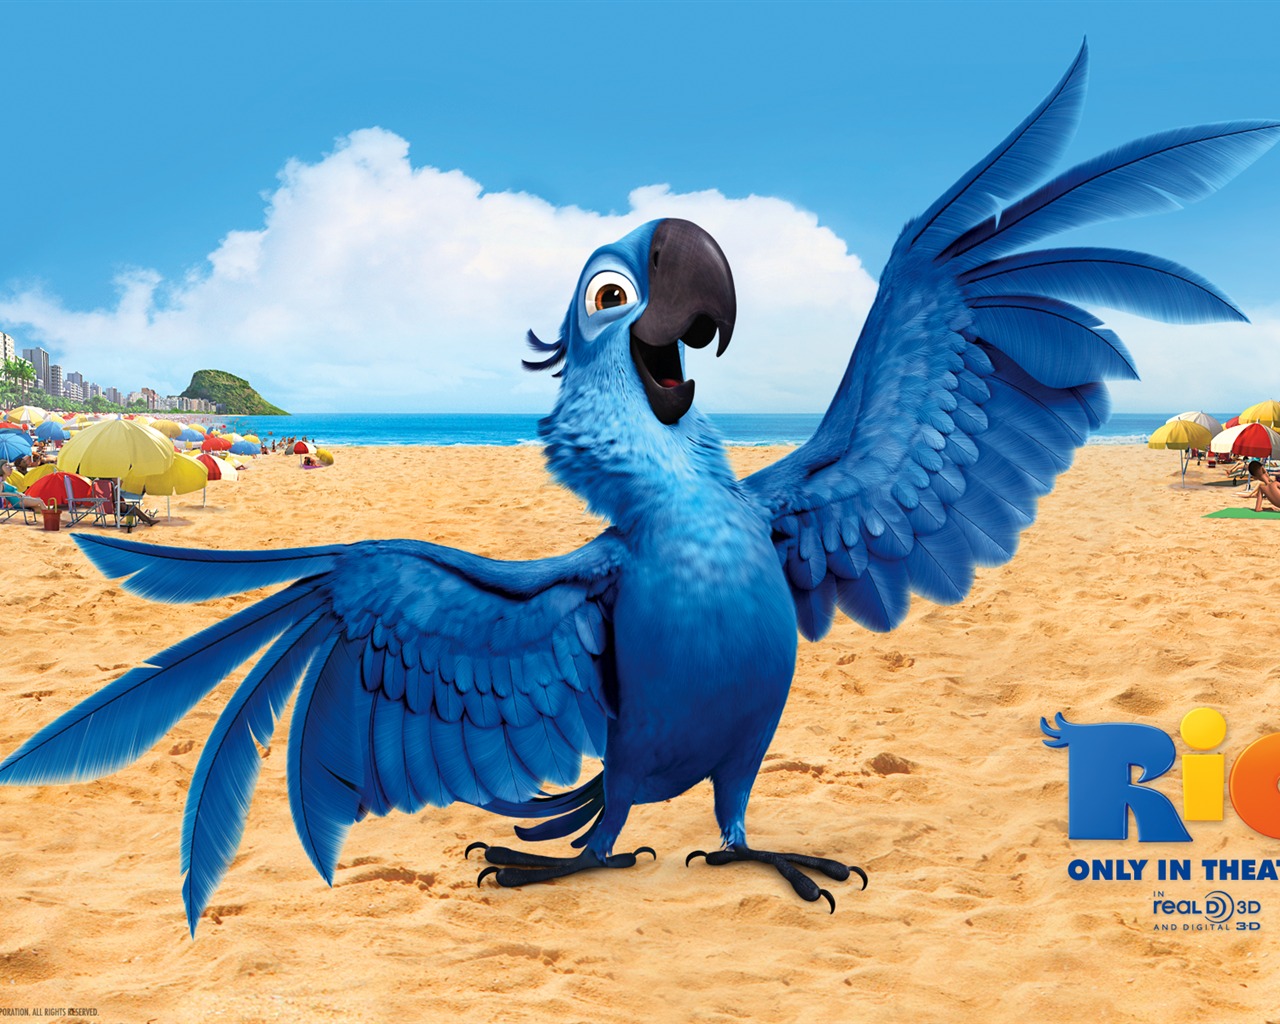 Rio 2011 wallpapers #4 - 1280x1024